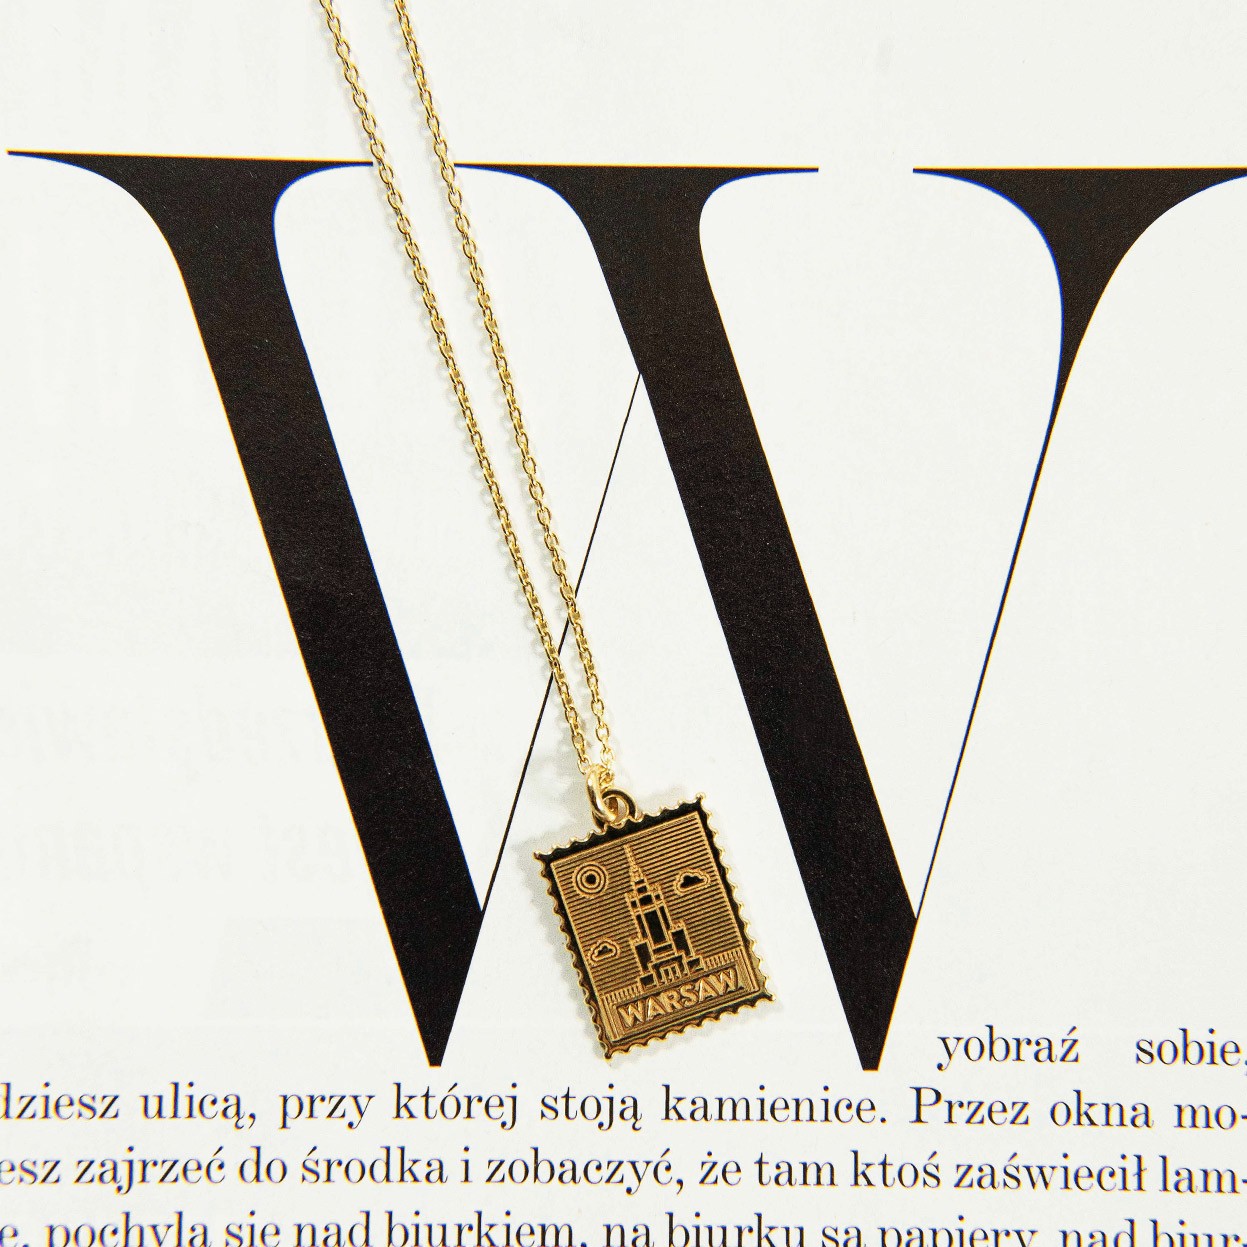 Letter necklace sterling silver 925